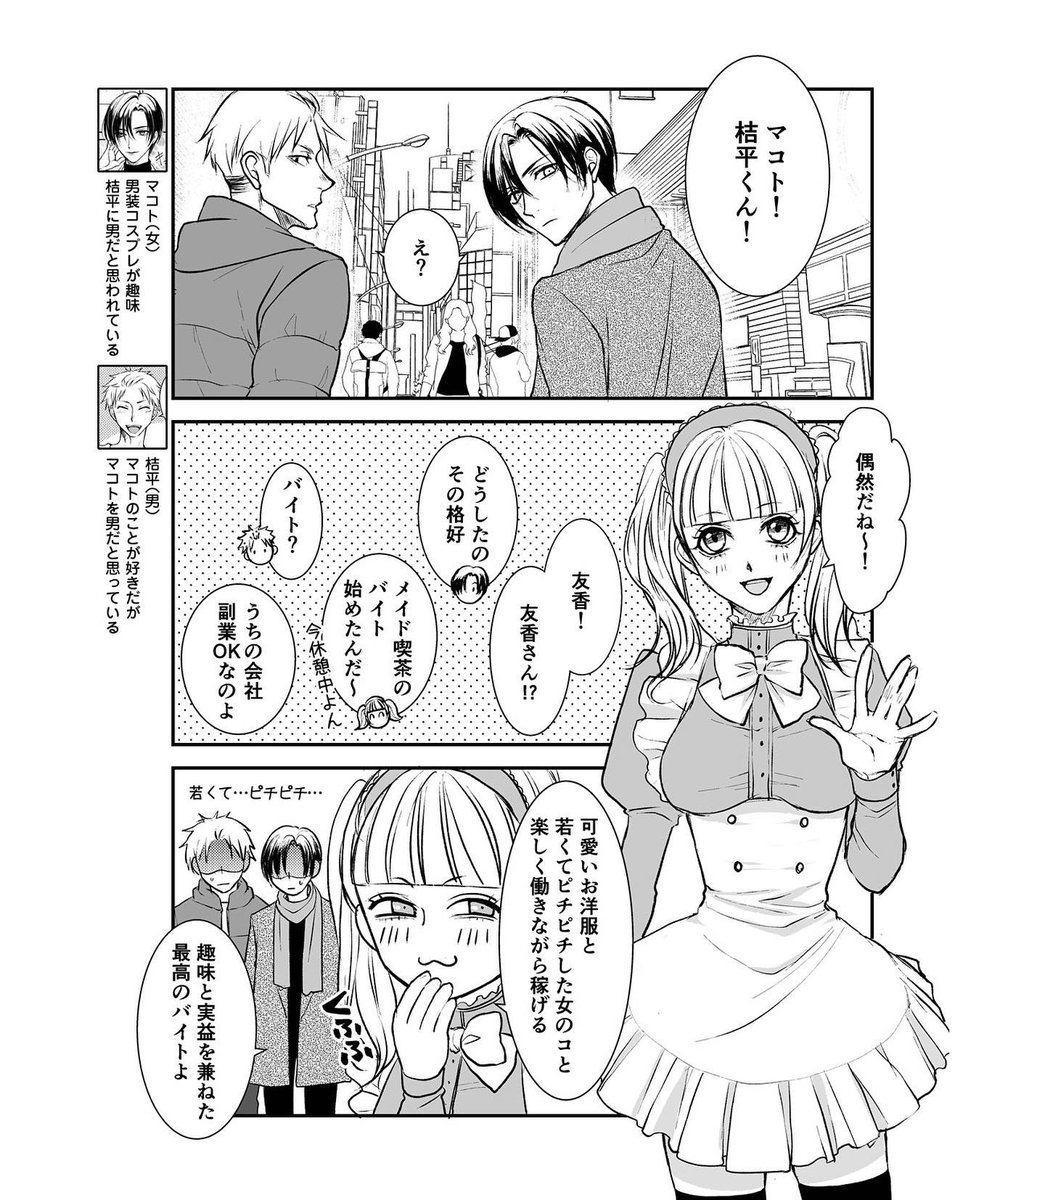 Instagramにイケメン男装漫画12話アップしました🙂

https://t.co/a733HH3cdl 